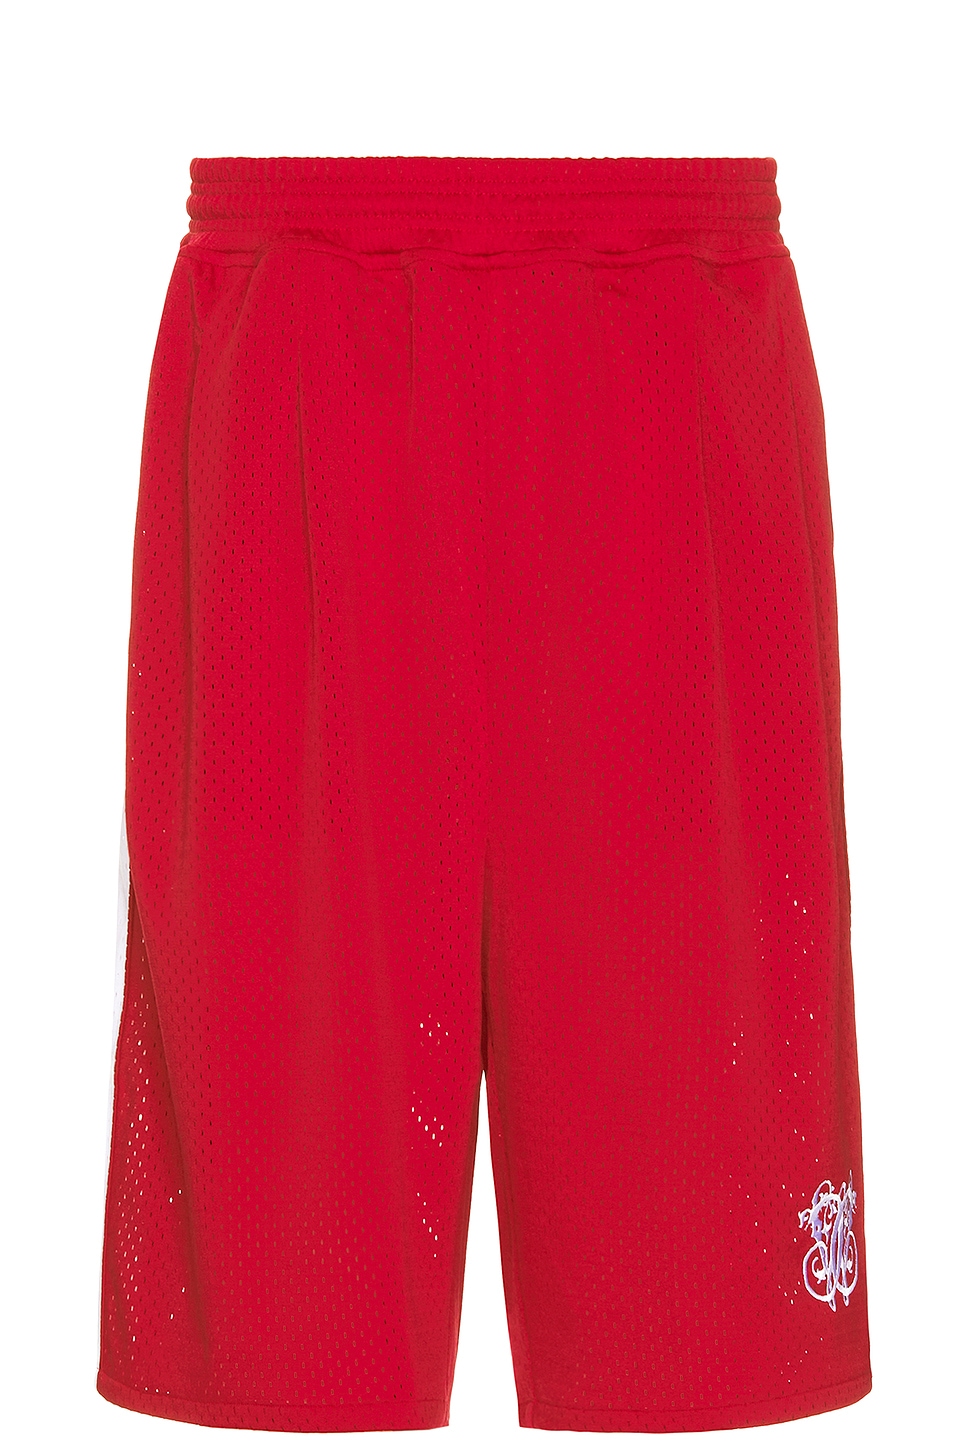 Tacombi Pleated Basketball Shorts in Red